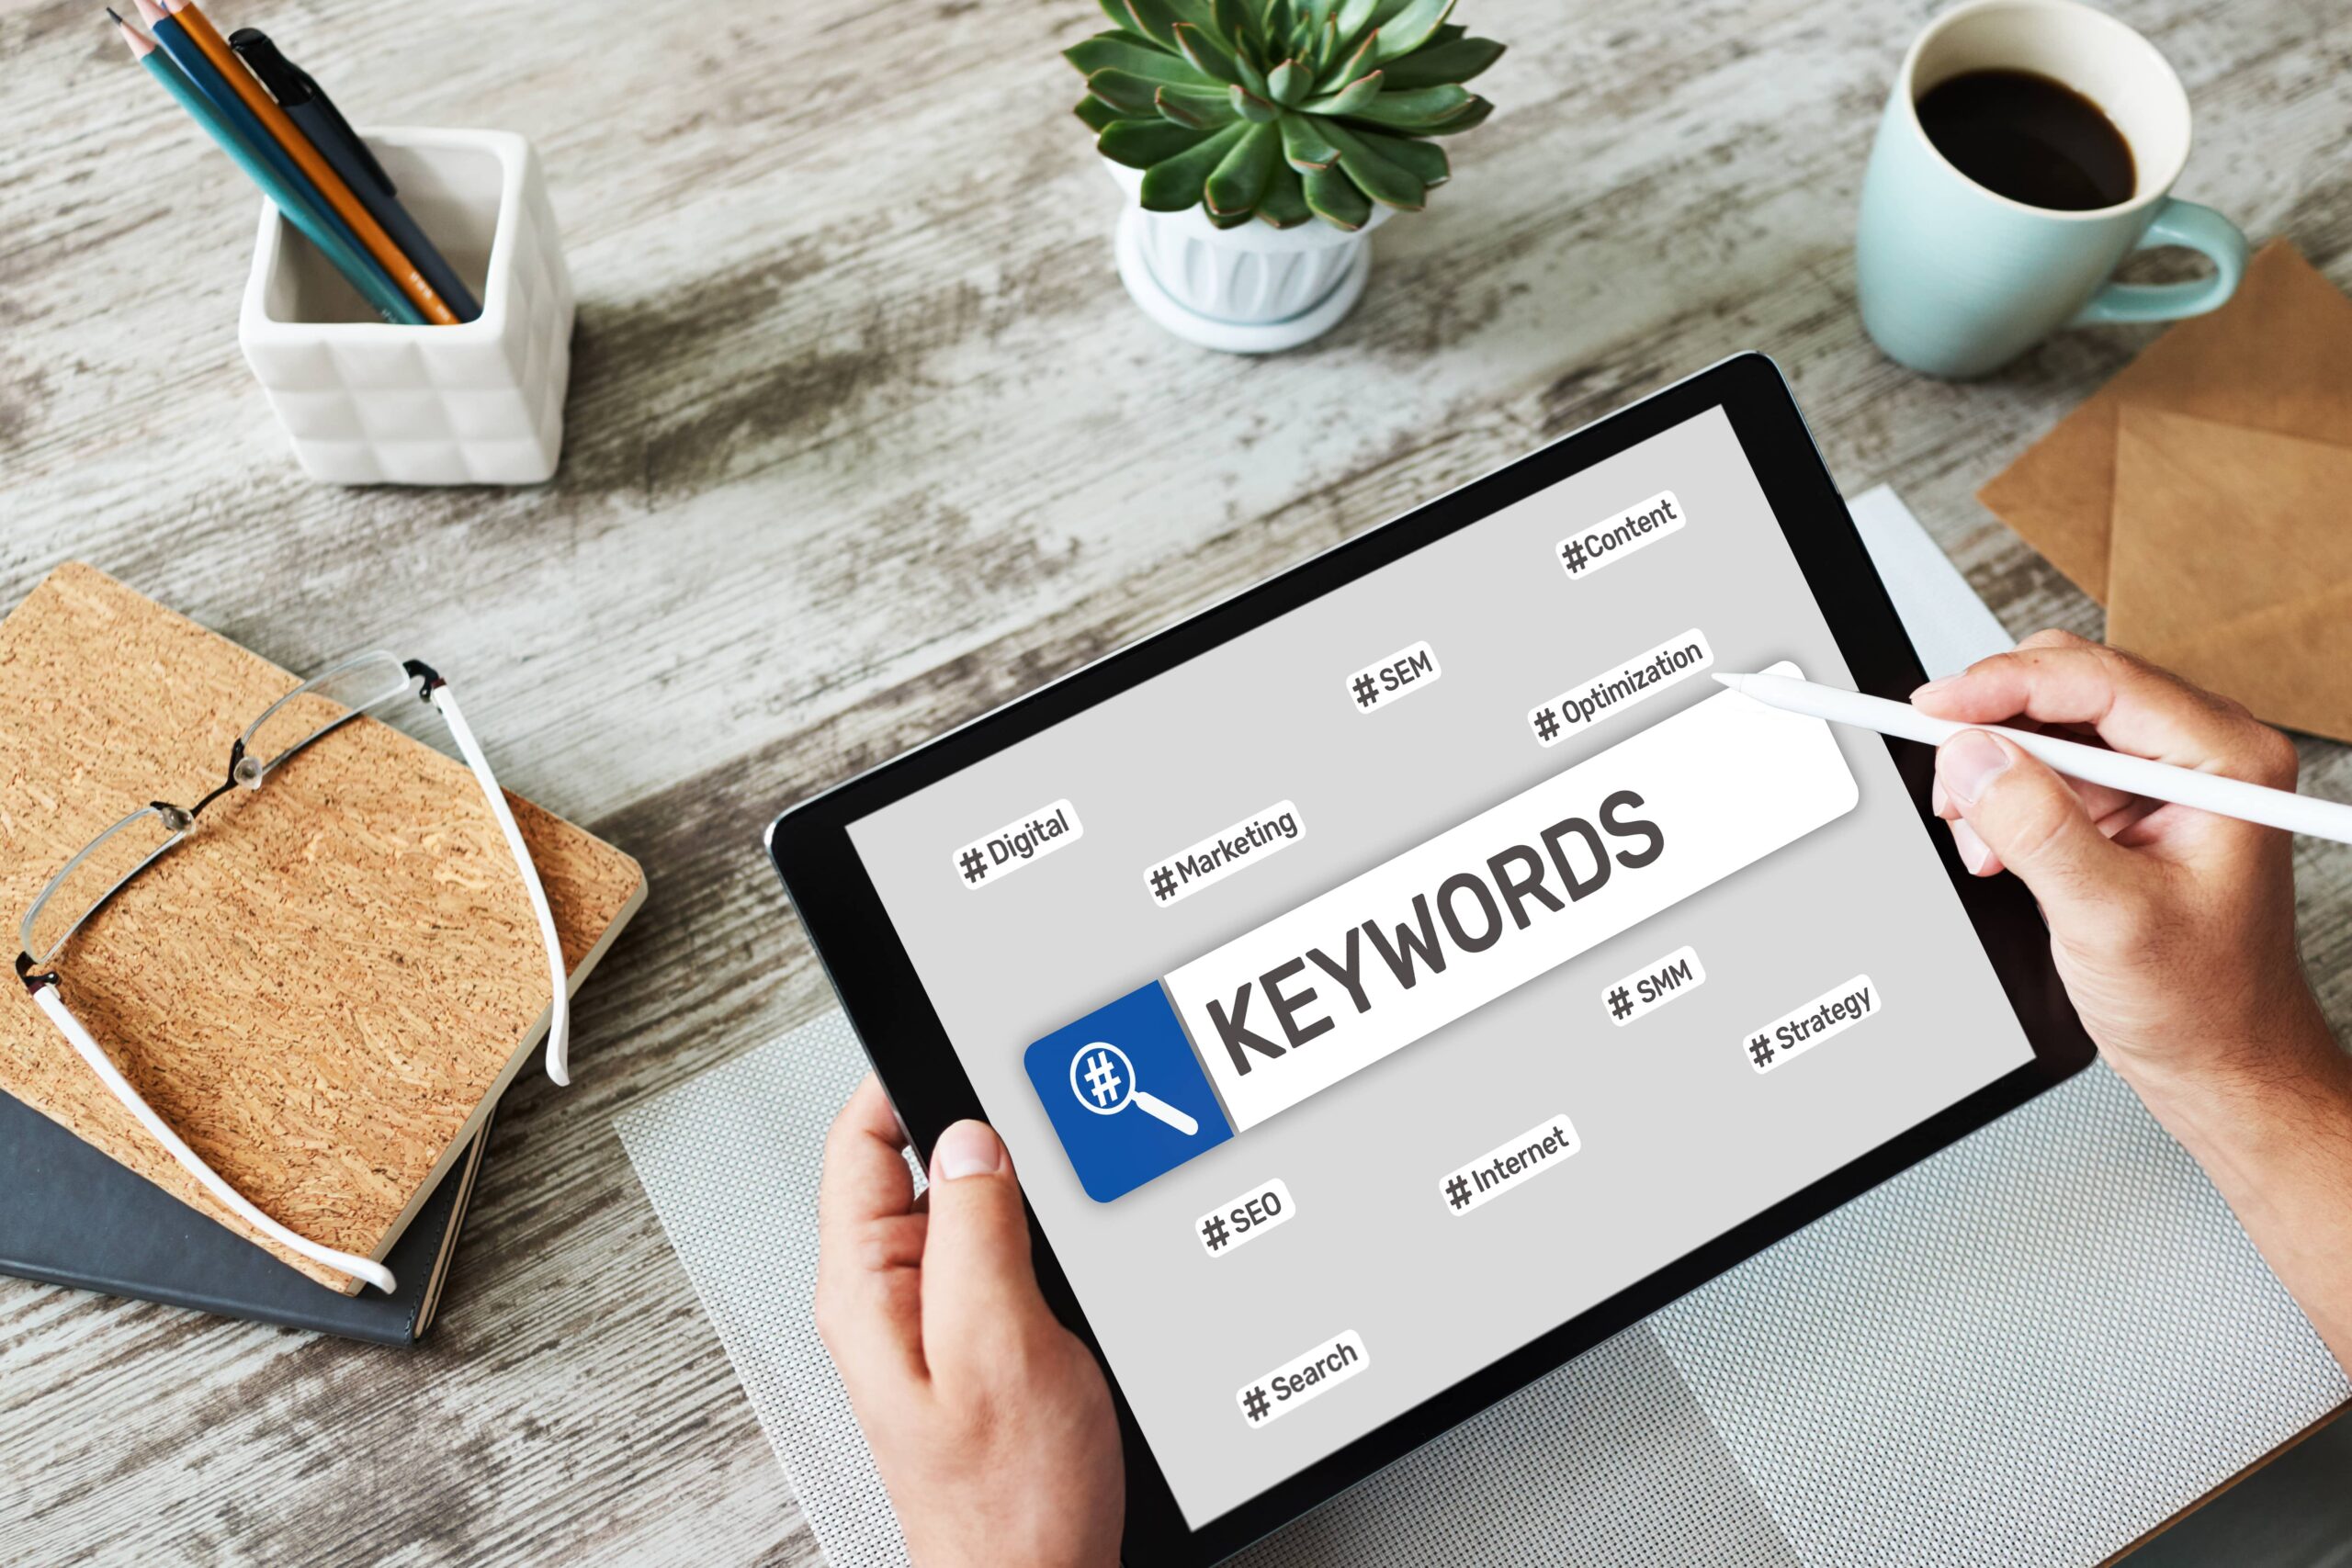 How to choose the right SEO keywords: a B2B guide